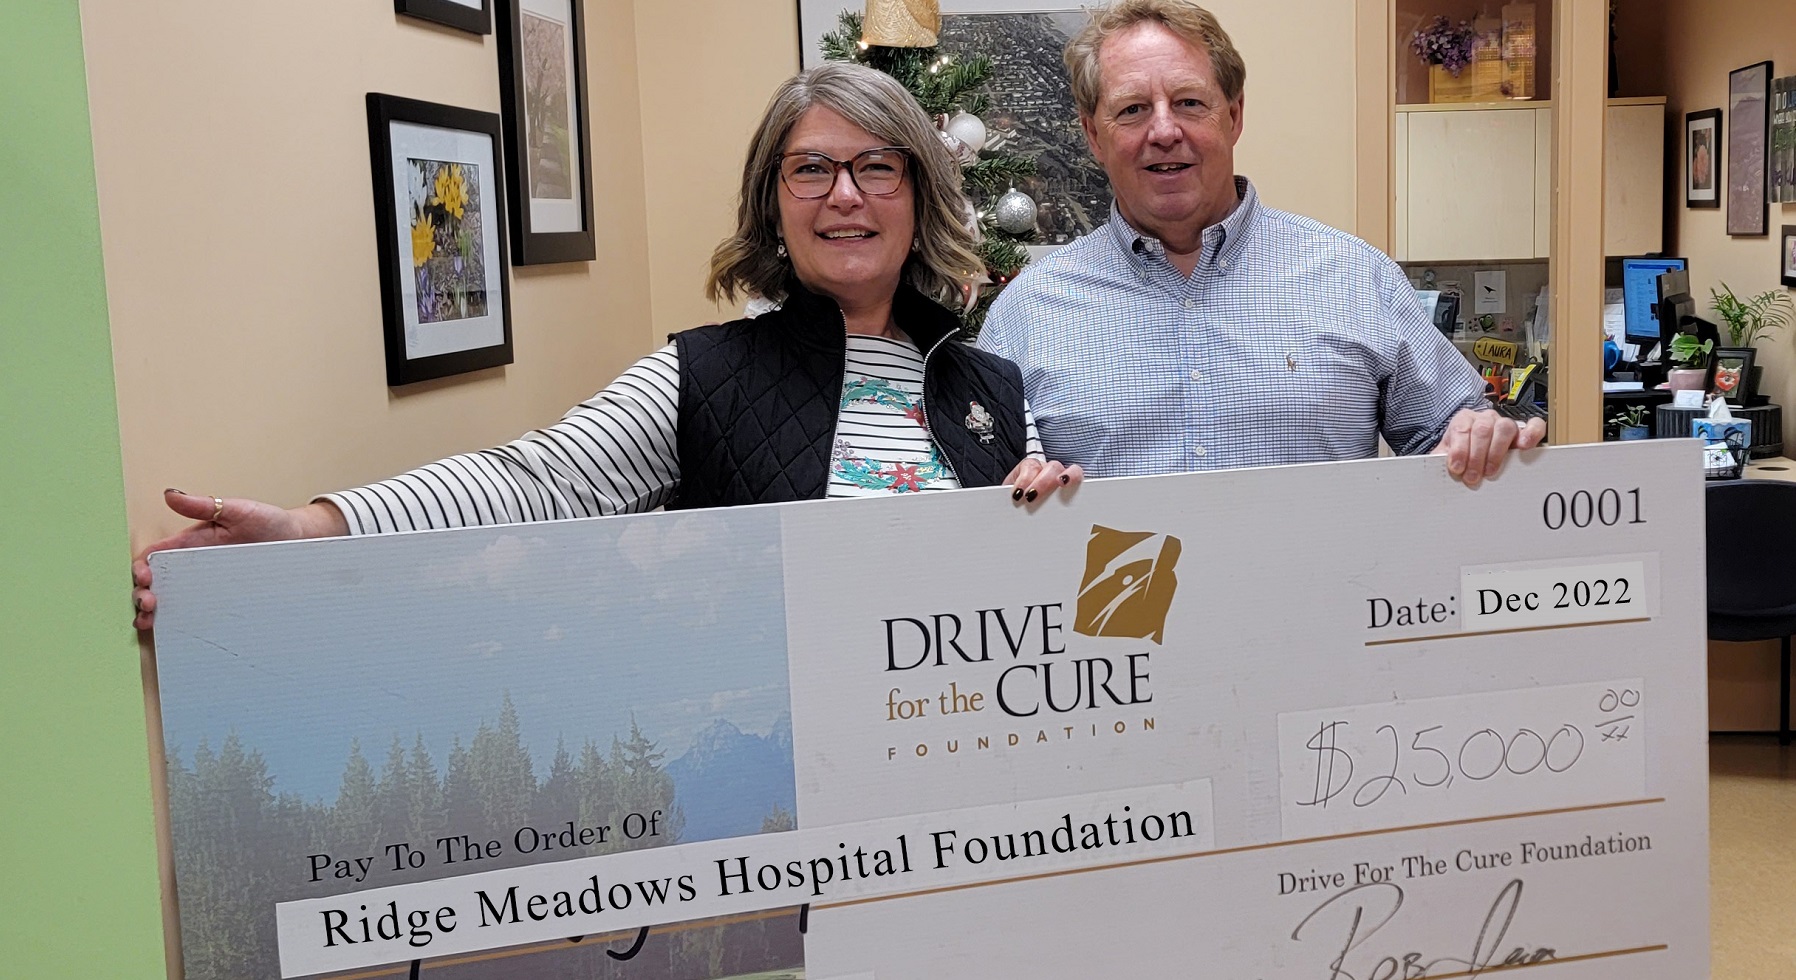 Drive for the Cure Foundation completes 4 year pledge